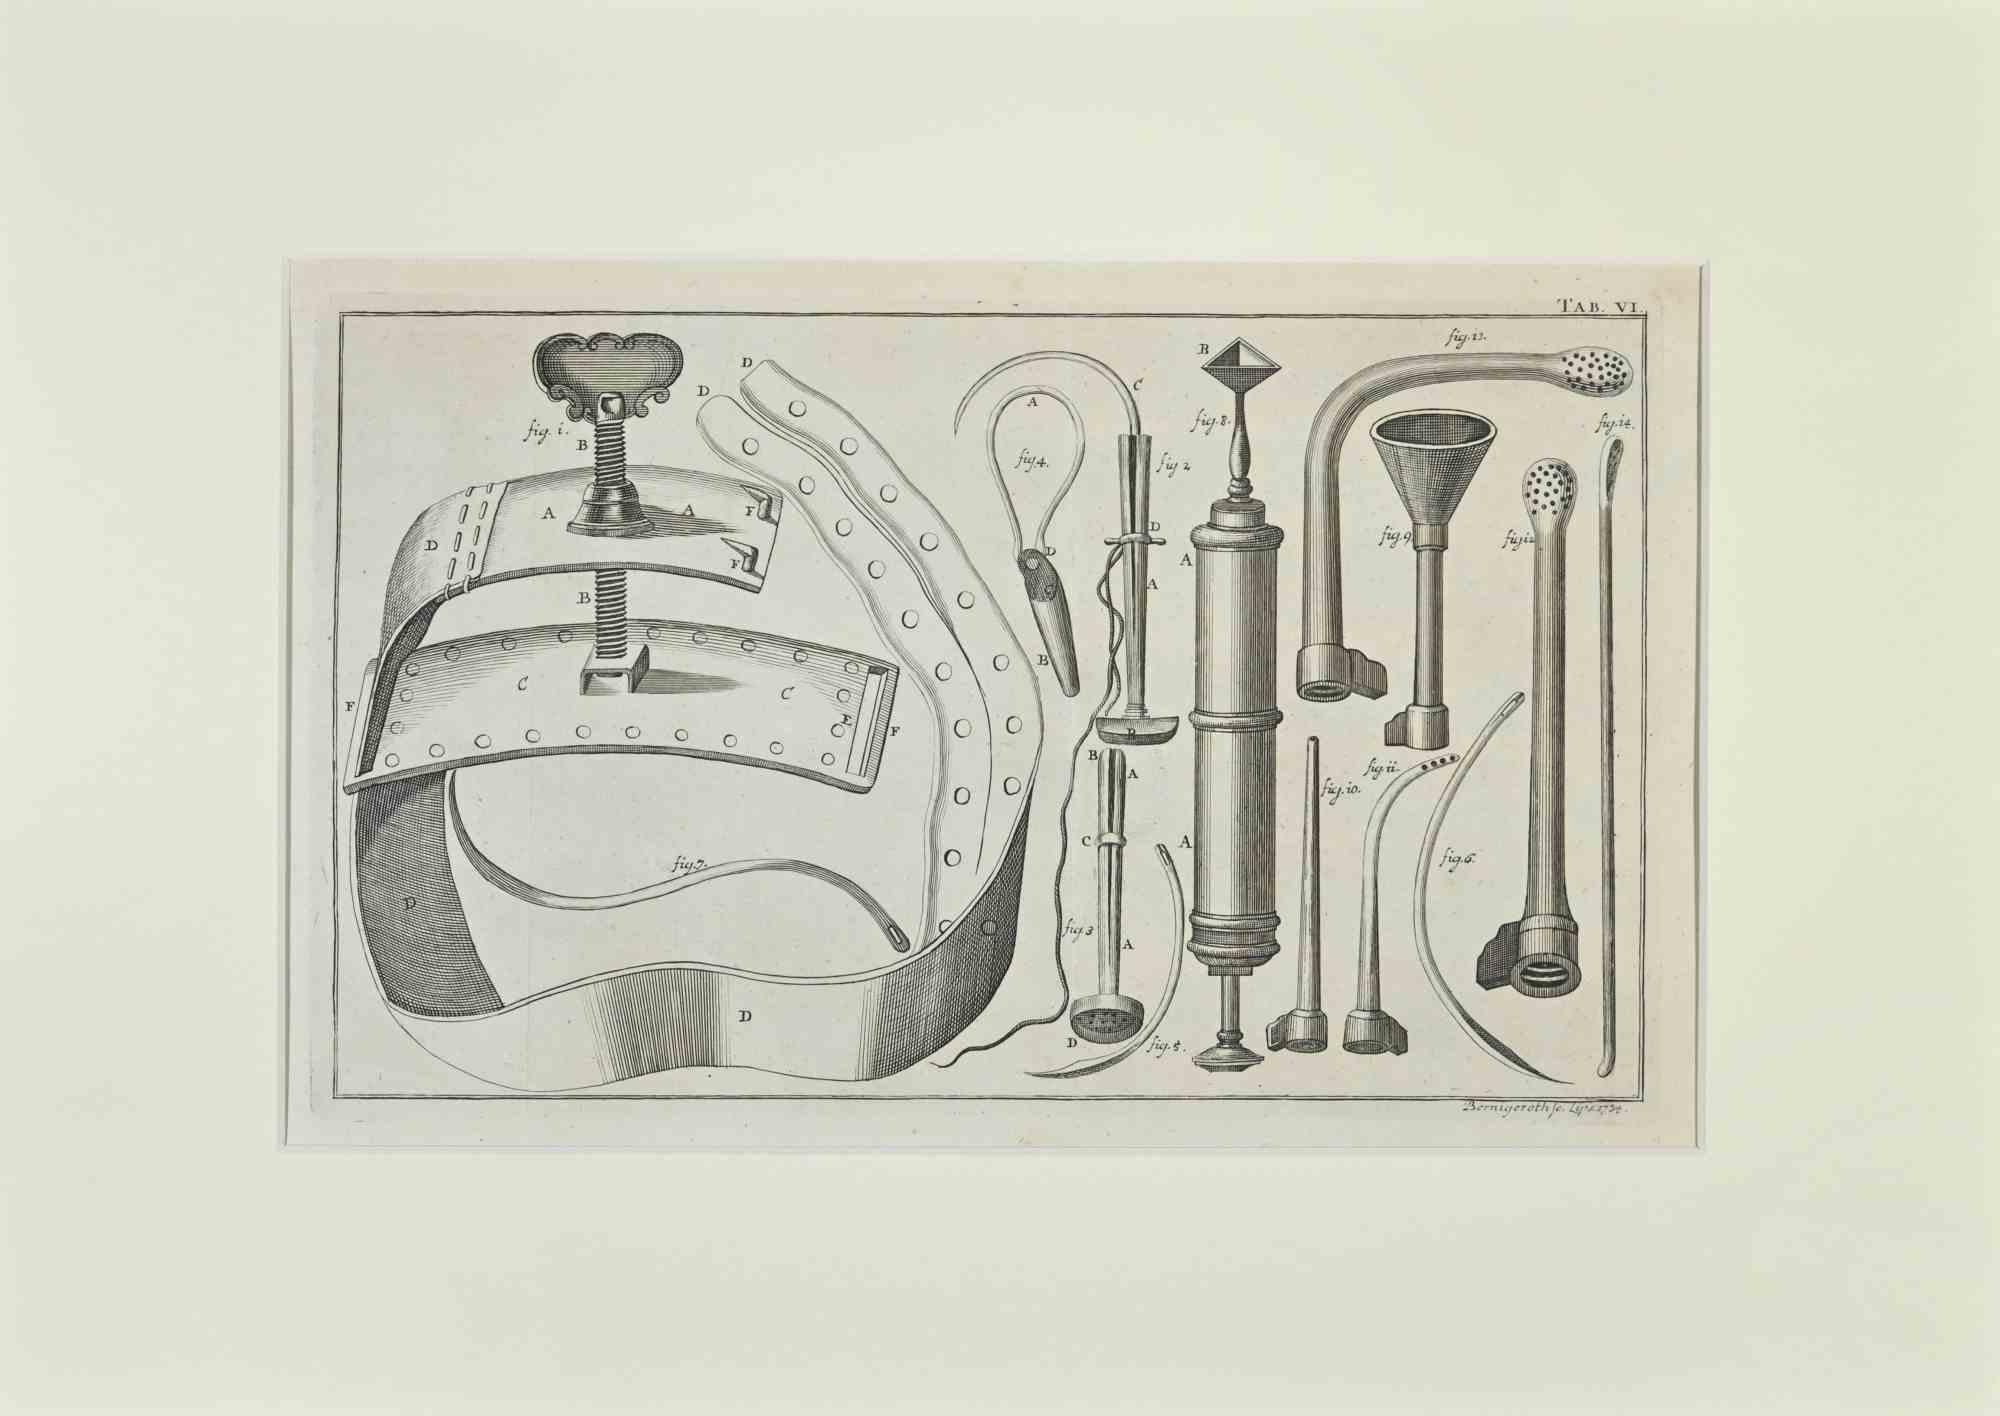 Surgical Instruments from the Suite Heister, Lorenz, realized by Lorenz Heister in the series of Institutiones chirurgicae. Amsterdam, Janssonius-Waesberg, 1750.

Etching on paper

The work belongs to the Latin edition of the famous work by the